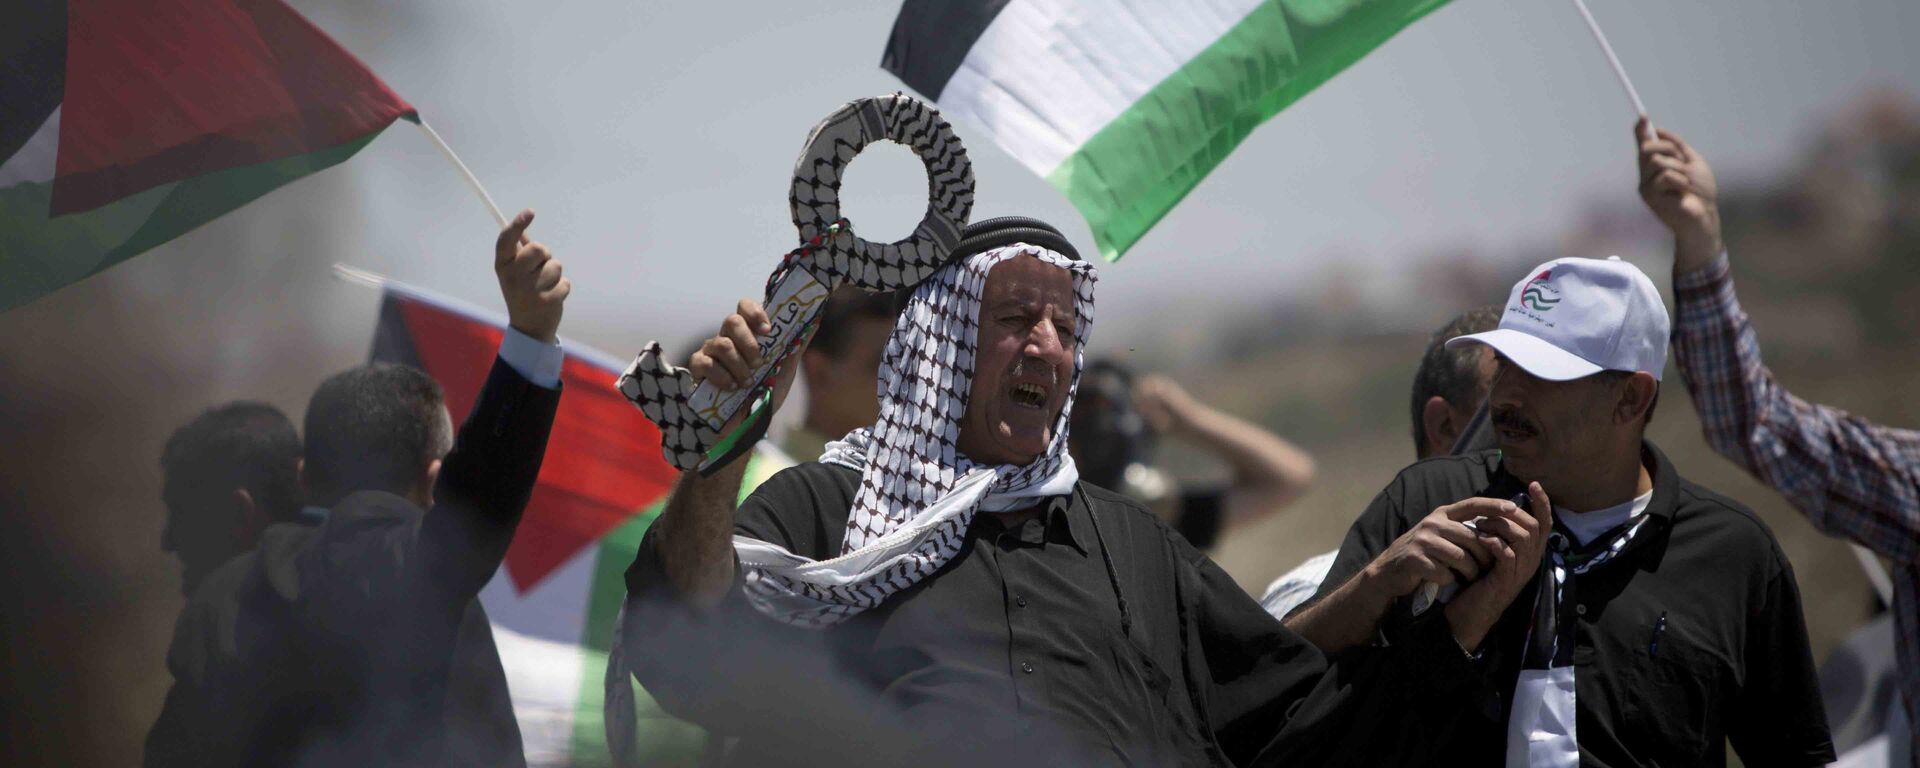 CORRECTS SECOND SENTENCE - A Palestinian holds a large key symbolizing the right of return for refugees during clashes after a rally marking Nakba Day at Hawara checkpoint near the West Bank city of Nablus, Saturday, May 16, 2015 - Sputnik International, 1920, 06.02.2021